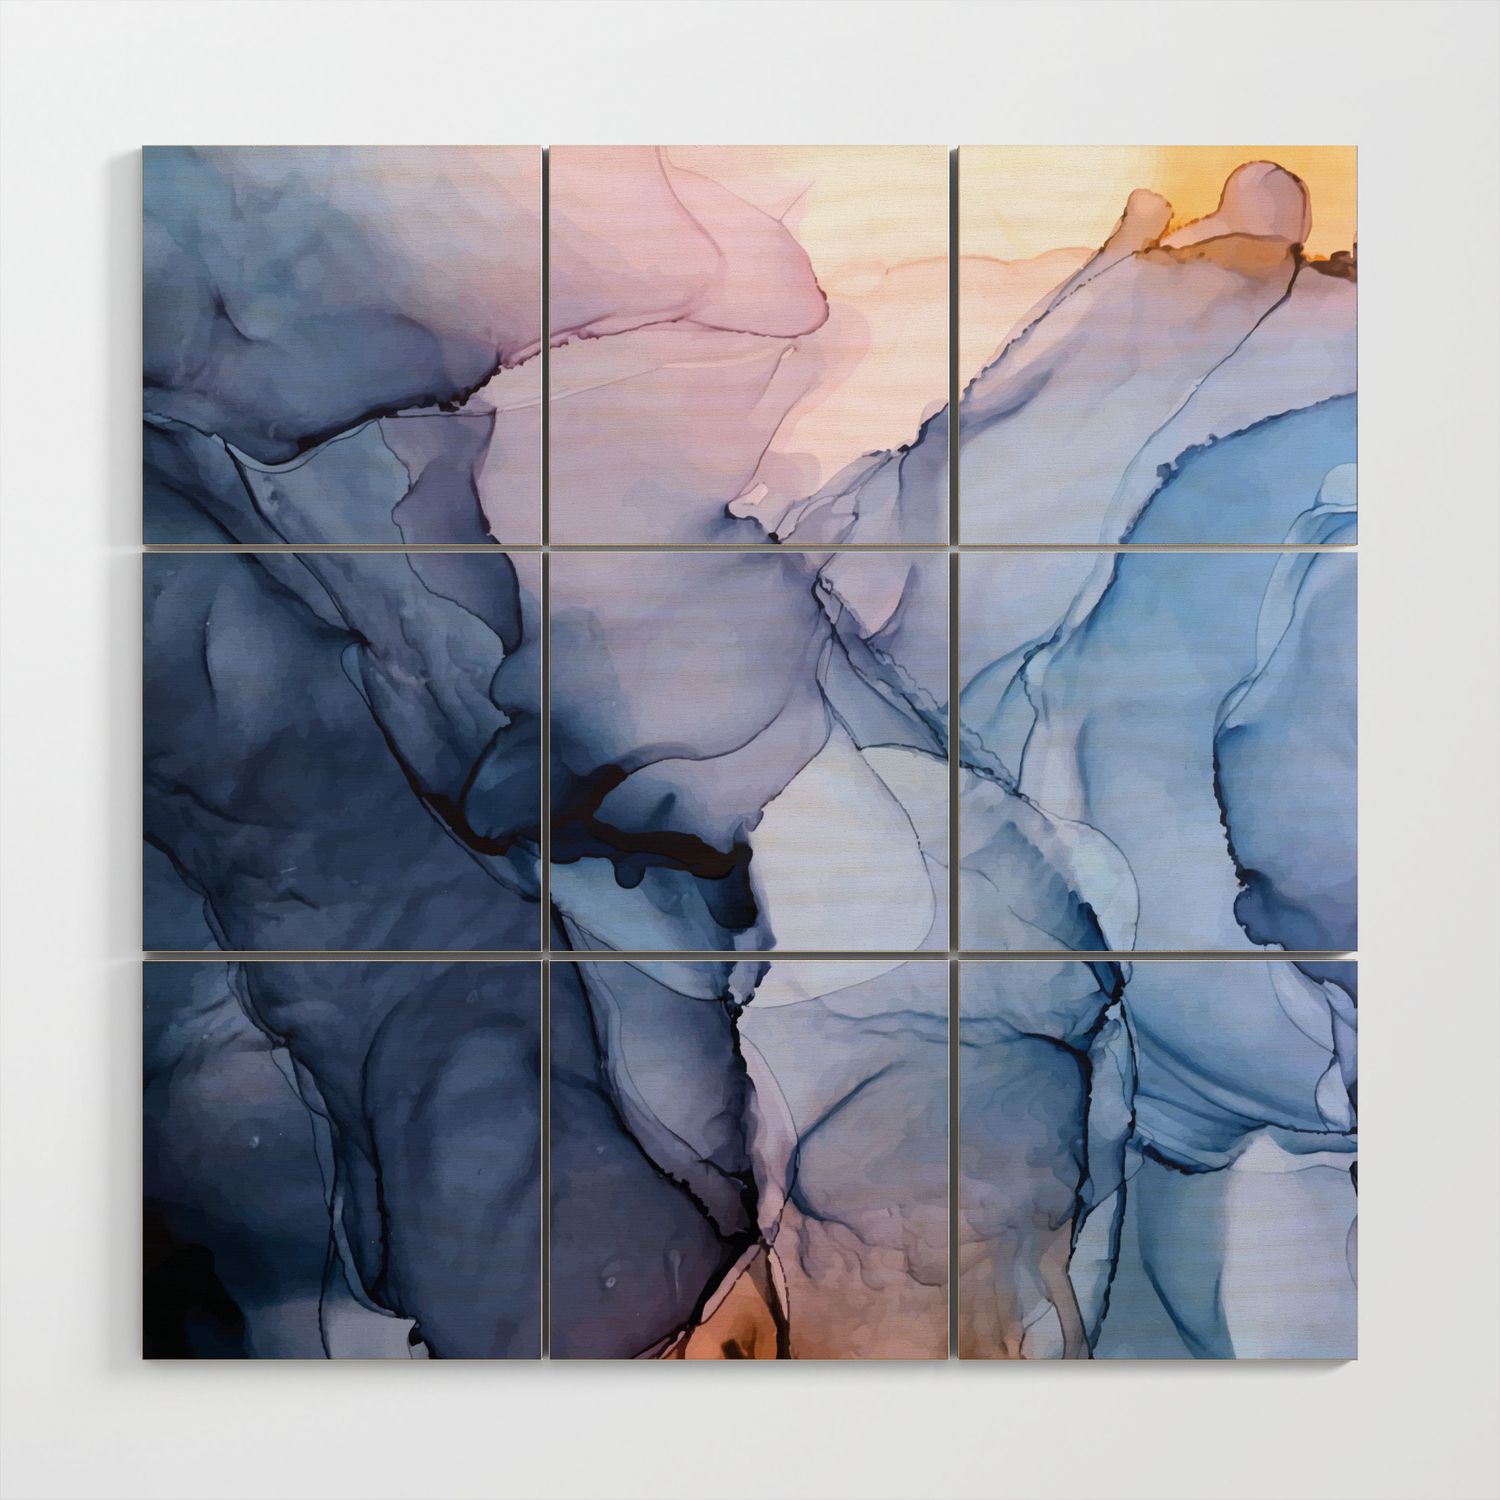 Captivating 1 – Alcohol Ink Painting Wood Wall Artelizabeth Karlson Art  | Society6 Intended For Most Recently Released Ink Art Wall Art (View 6 of 20)